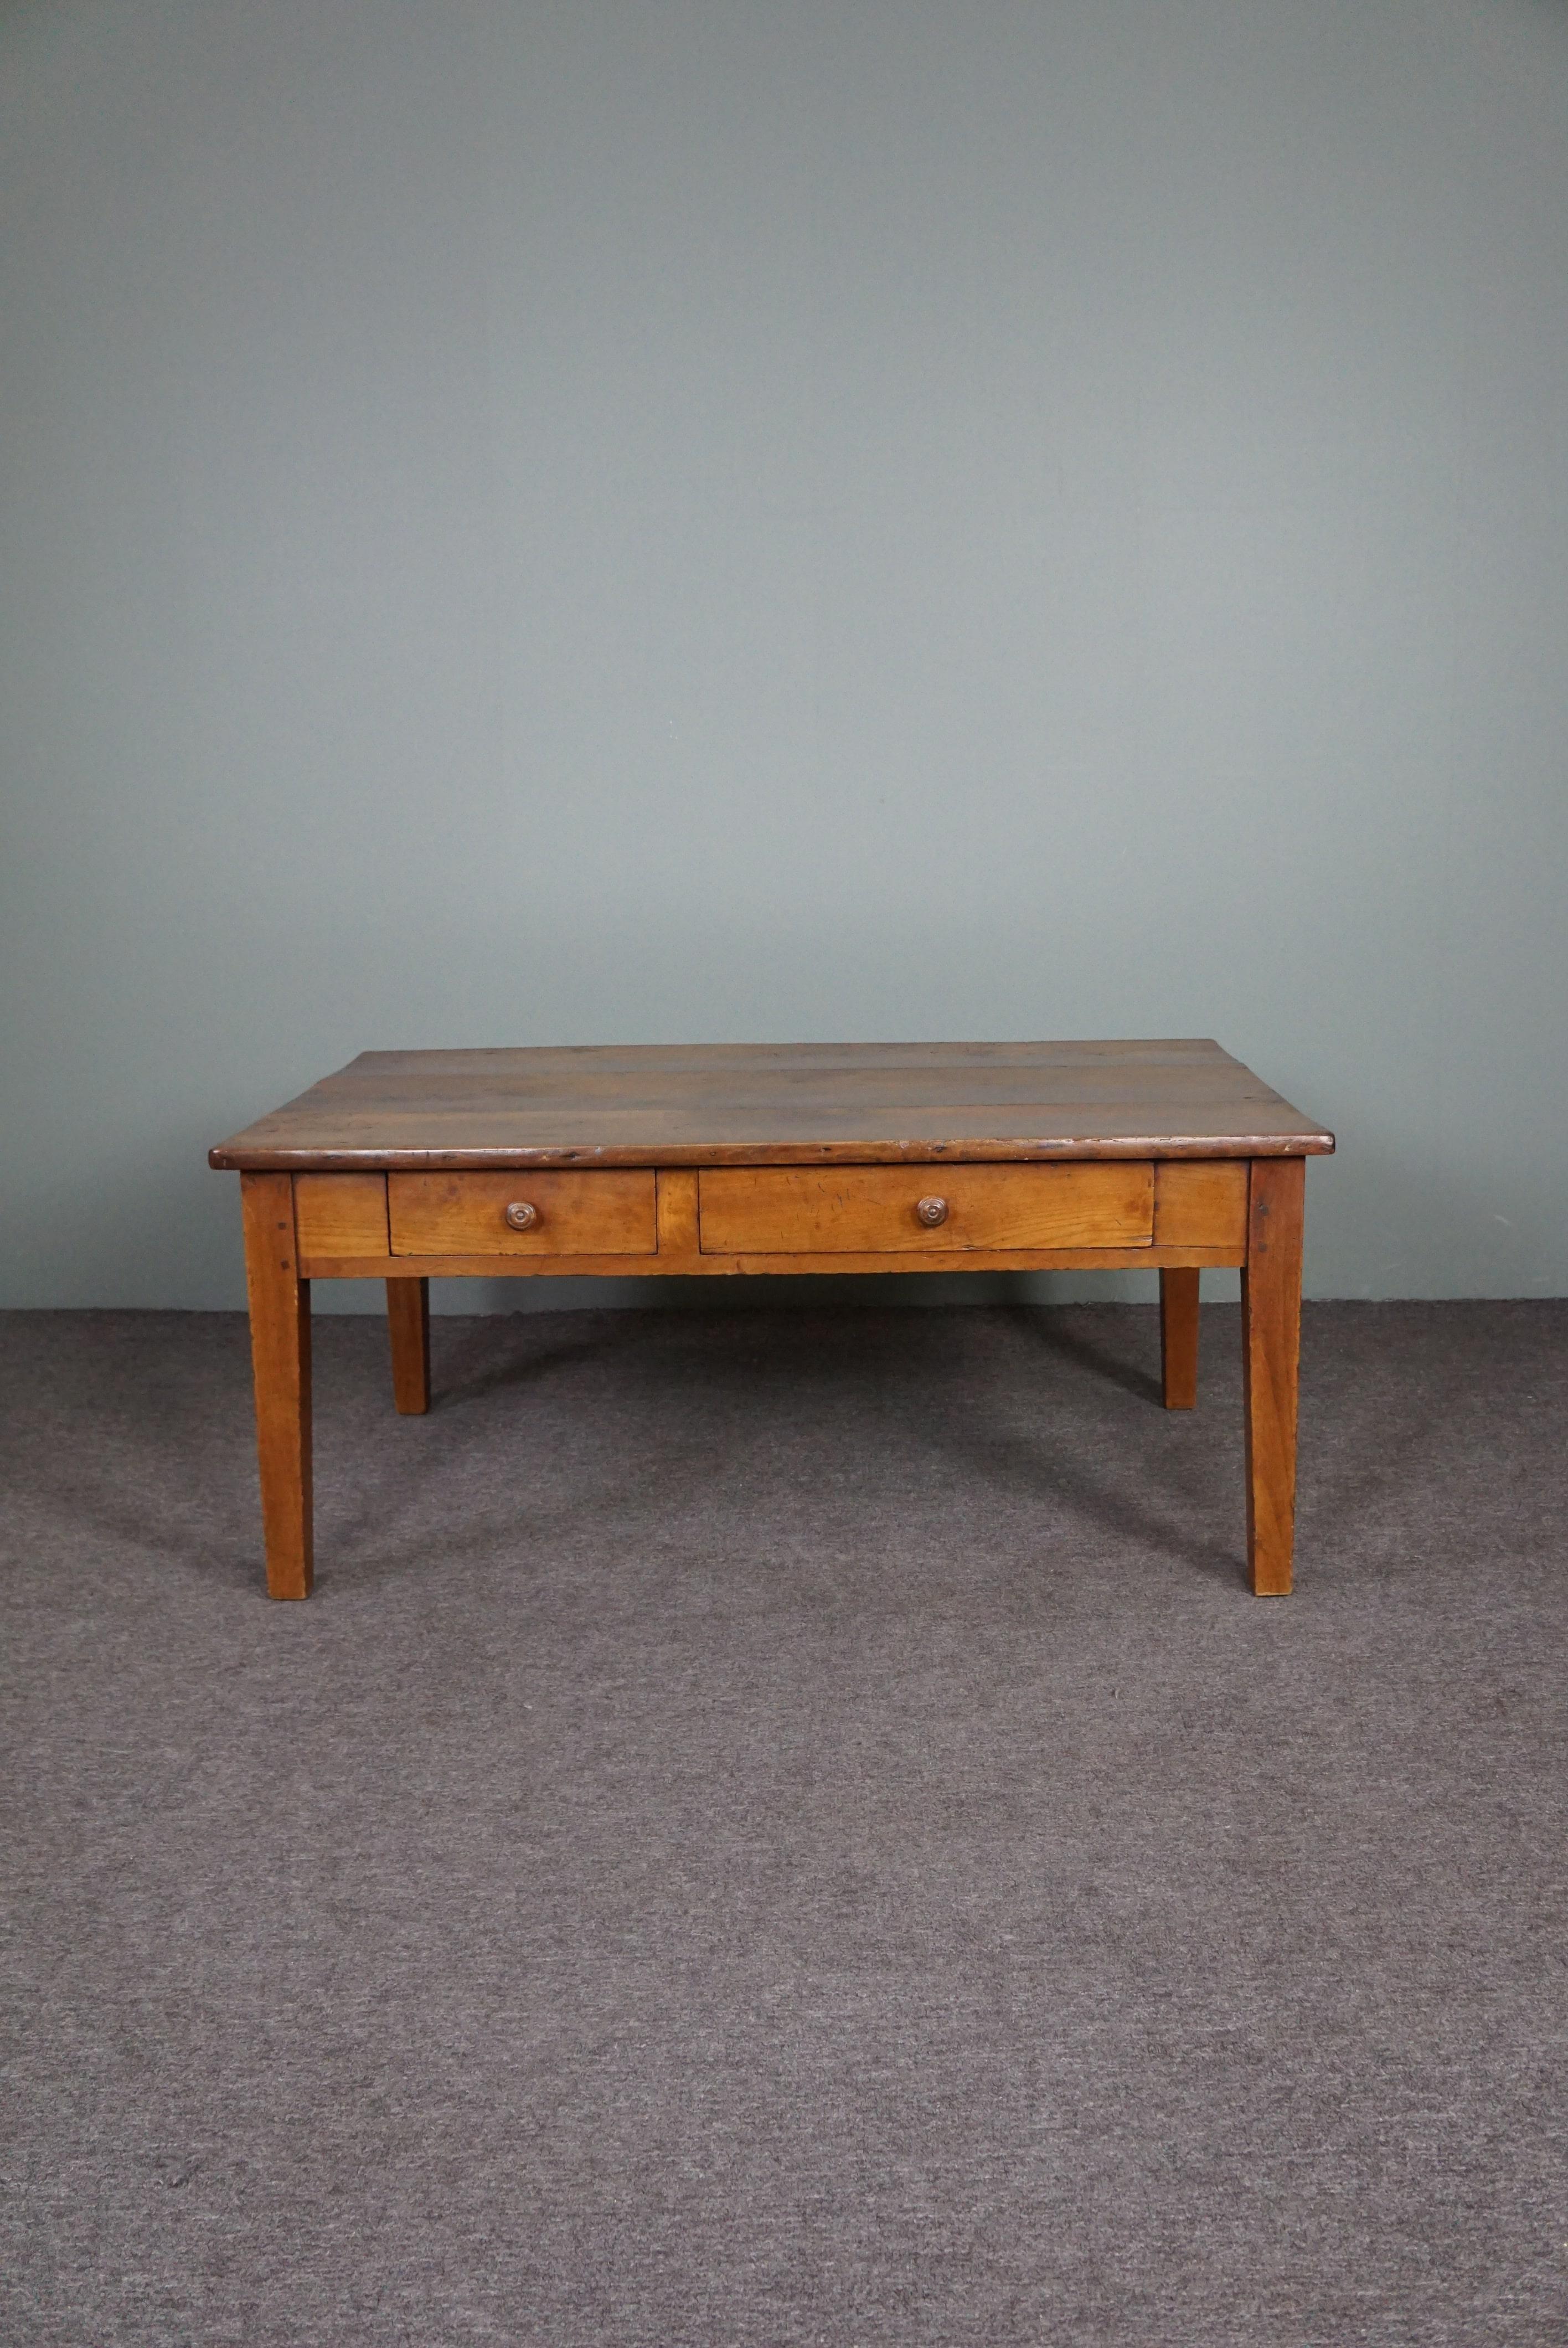 This large Southern European coffee table has two drawers, a beautiful warm color and a striking patina. Over the years, this deeply colored coffee table has acquired a striking warm appearance and will therefore look great in many living